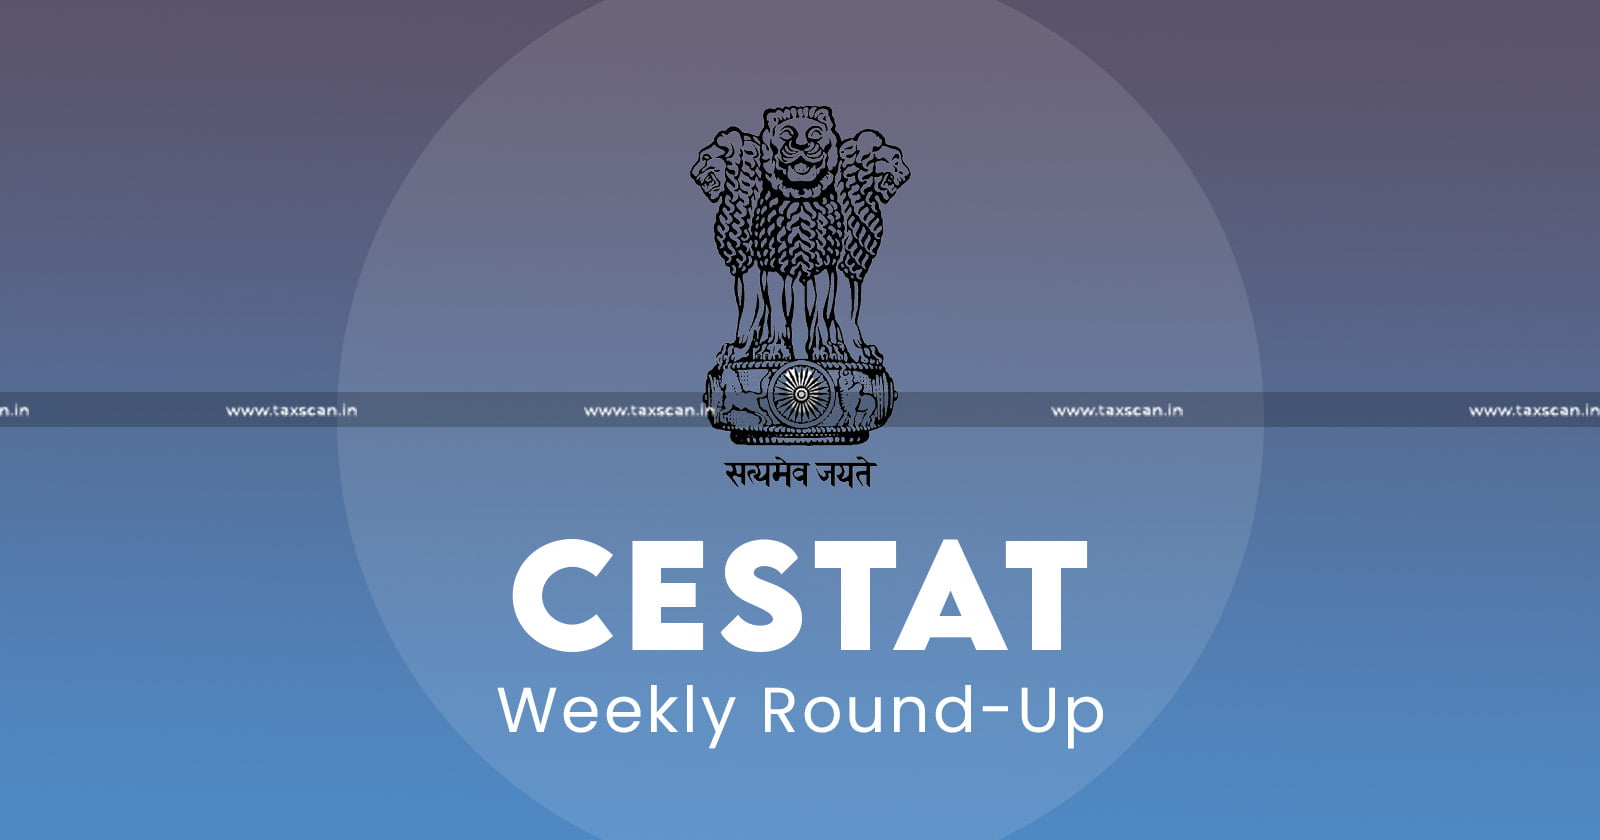 CESTAT - CESTAT Weekly round up - CESTAT Weekly news - Weekly round up - TAXSCAN